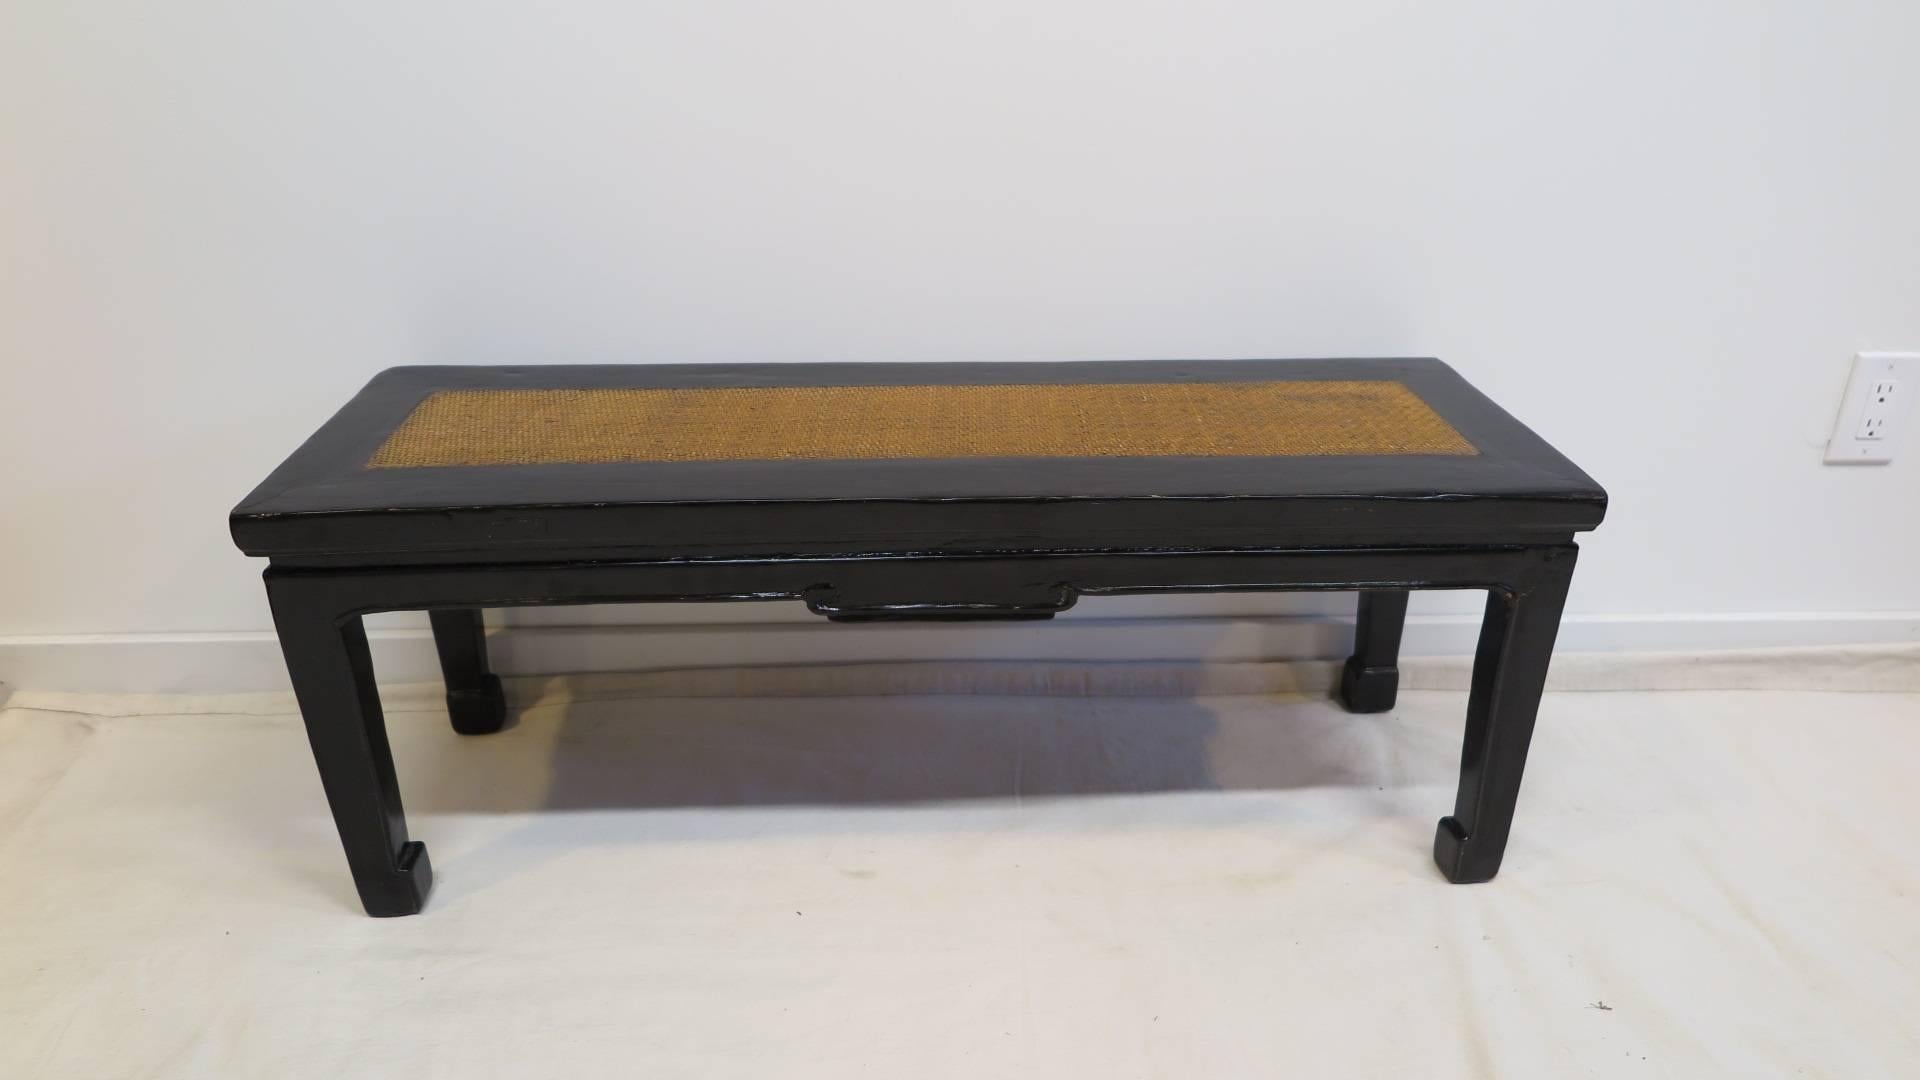 19th century Chinese bench. Elmwood with black lacquer and rattan set, horse hoof feet with carved detail to the aprons. Can be used for seating, or table. In very good condition. circa 1870.